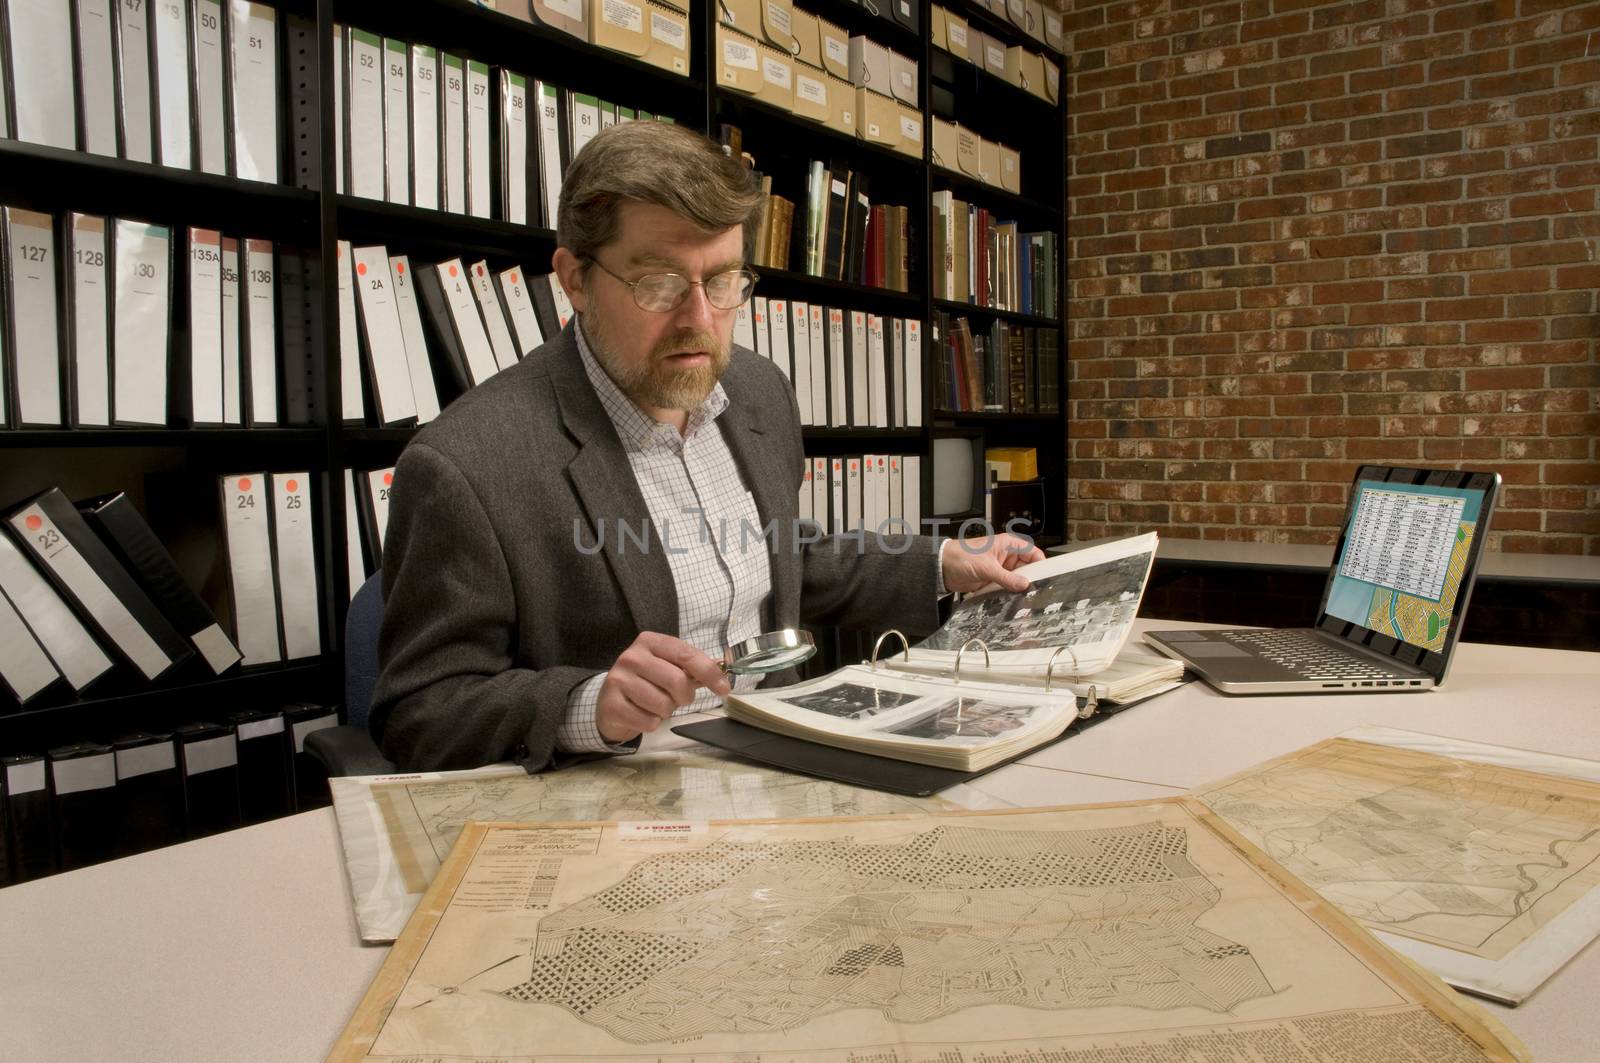 Researcher in archive, searching through maps and photographs by Balefire9